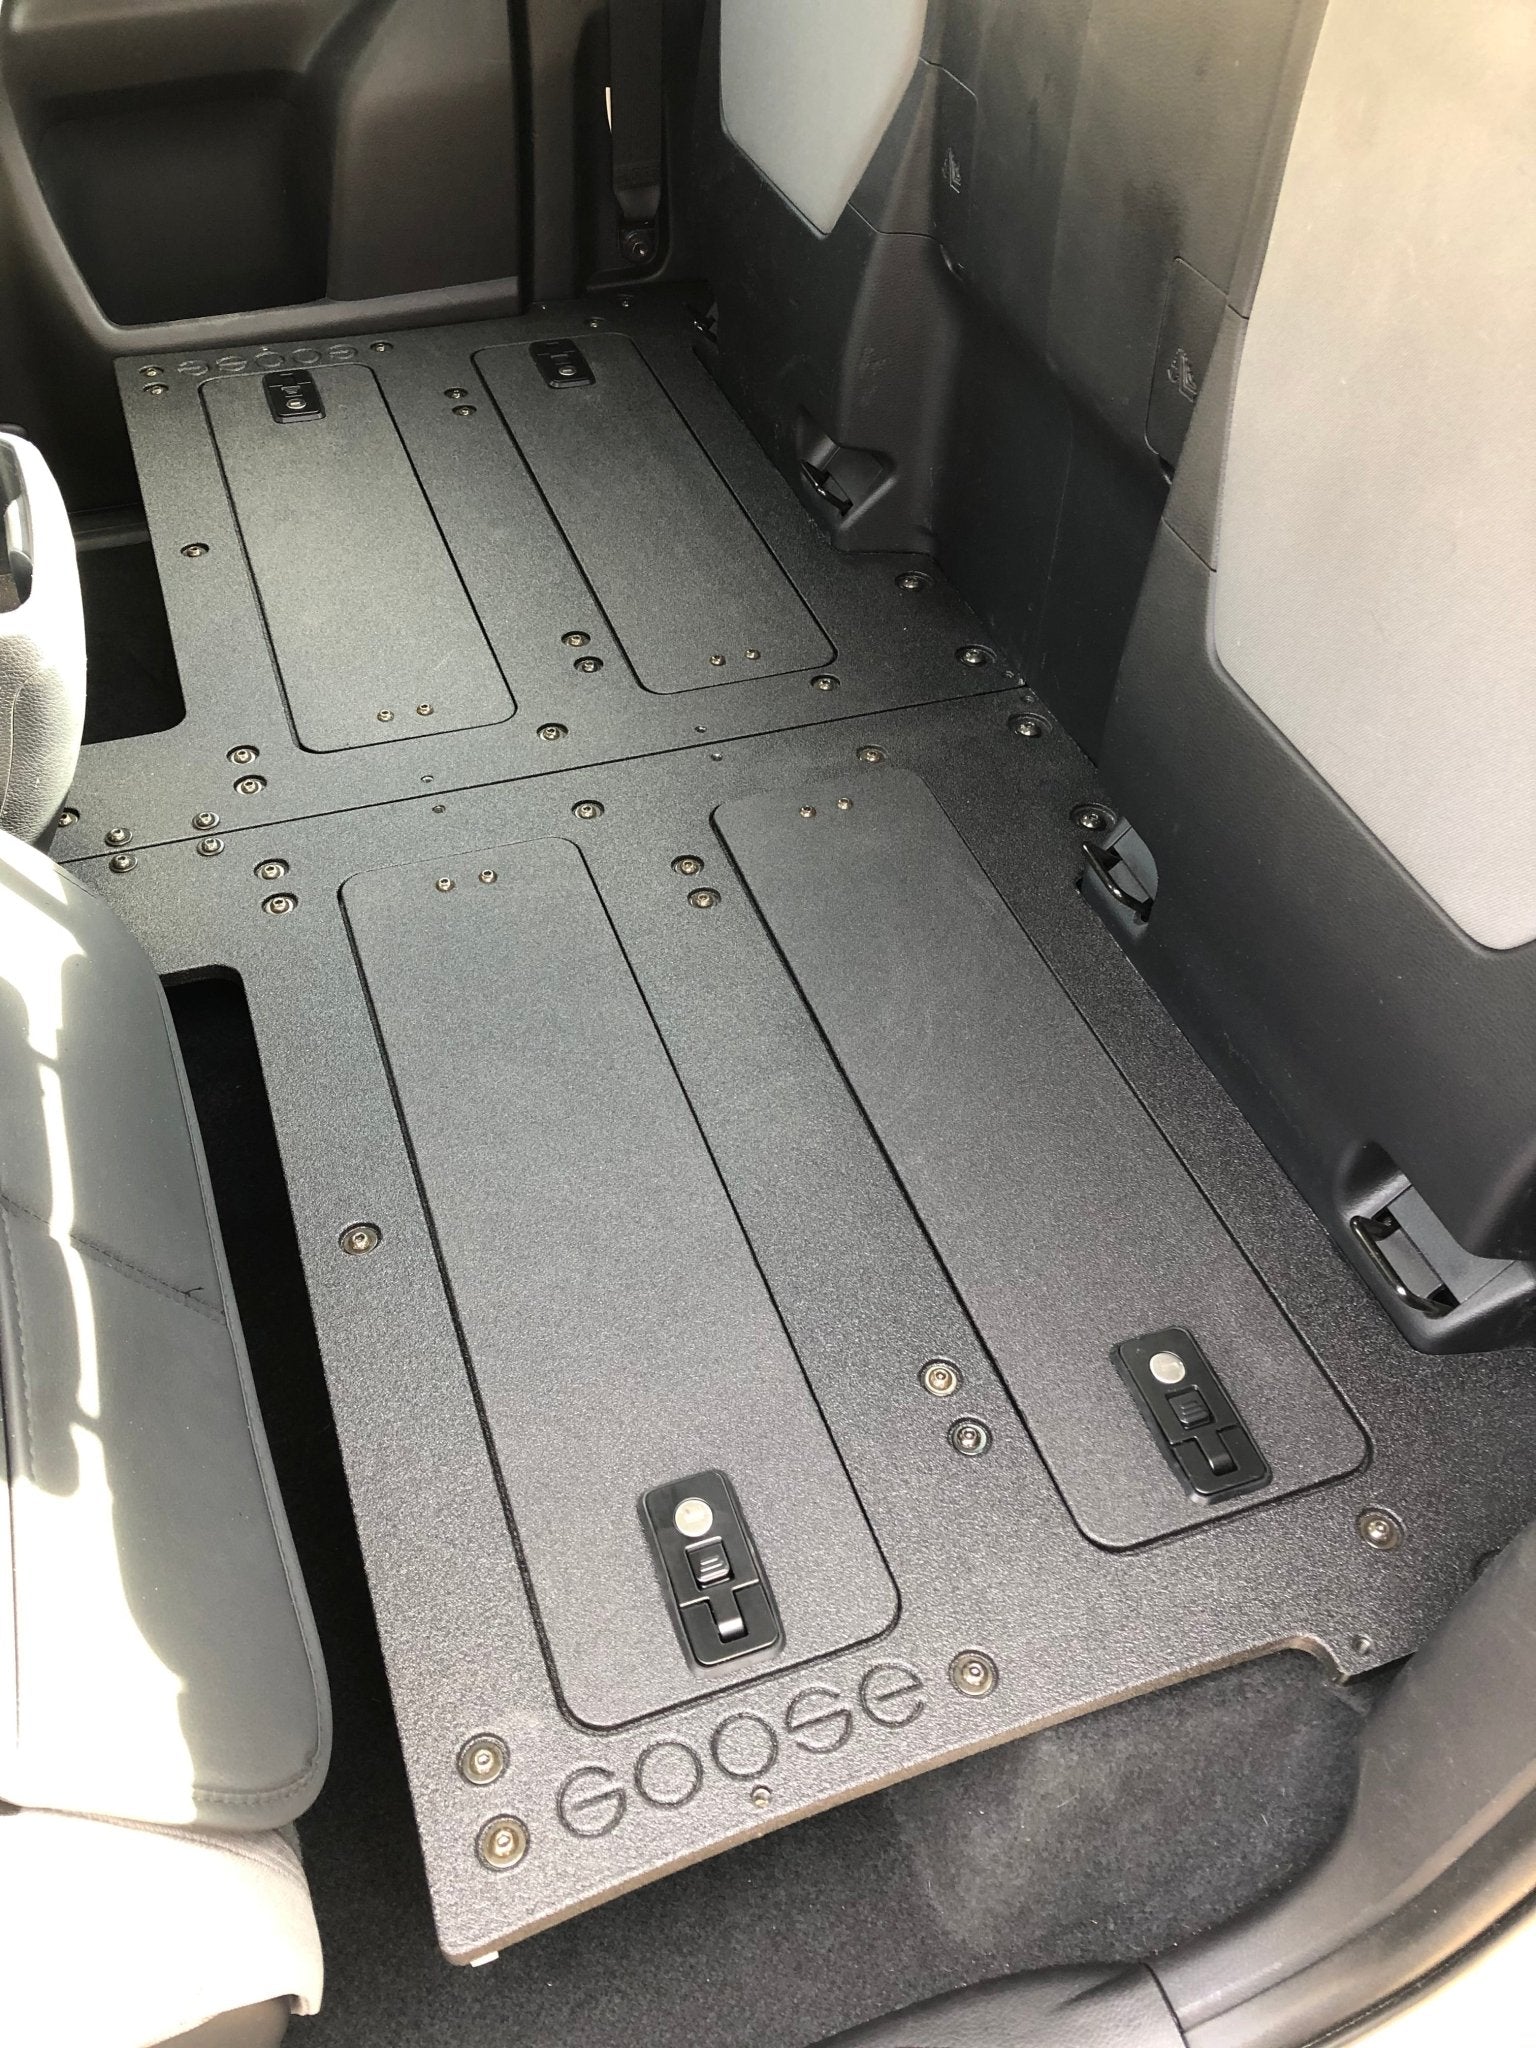 Goose Gear Toyota Tacoma 2016-Present 3rd Gen. Access Cab with Factory Seats - Second Row Seat Delete Plate System